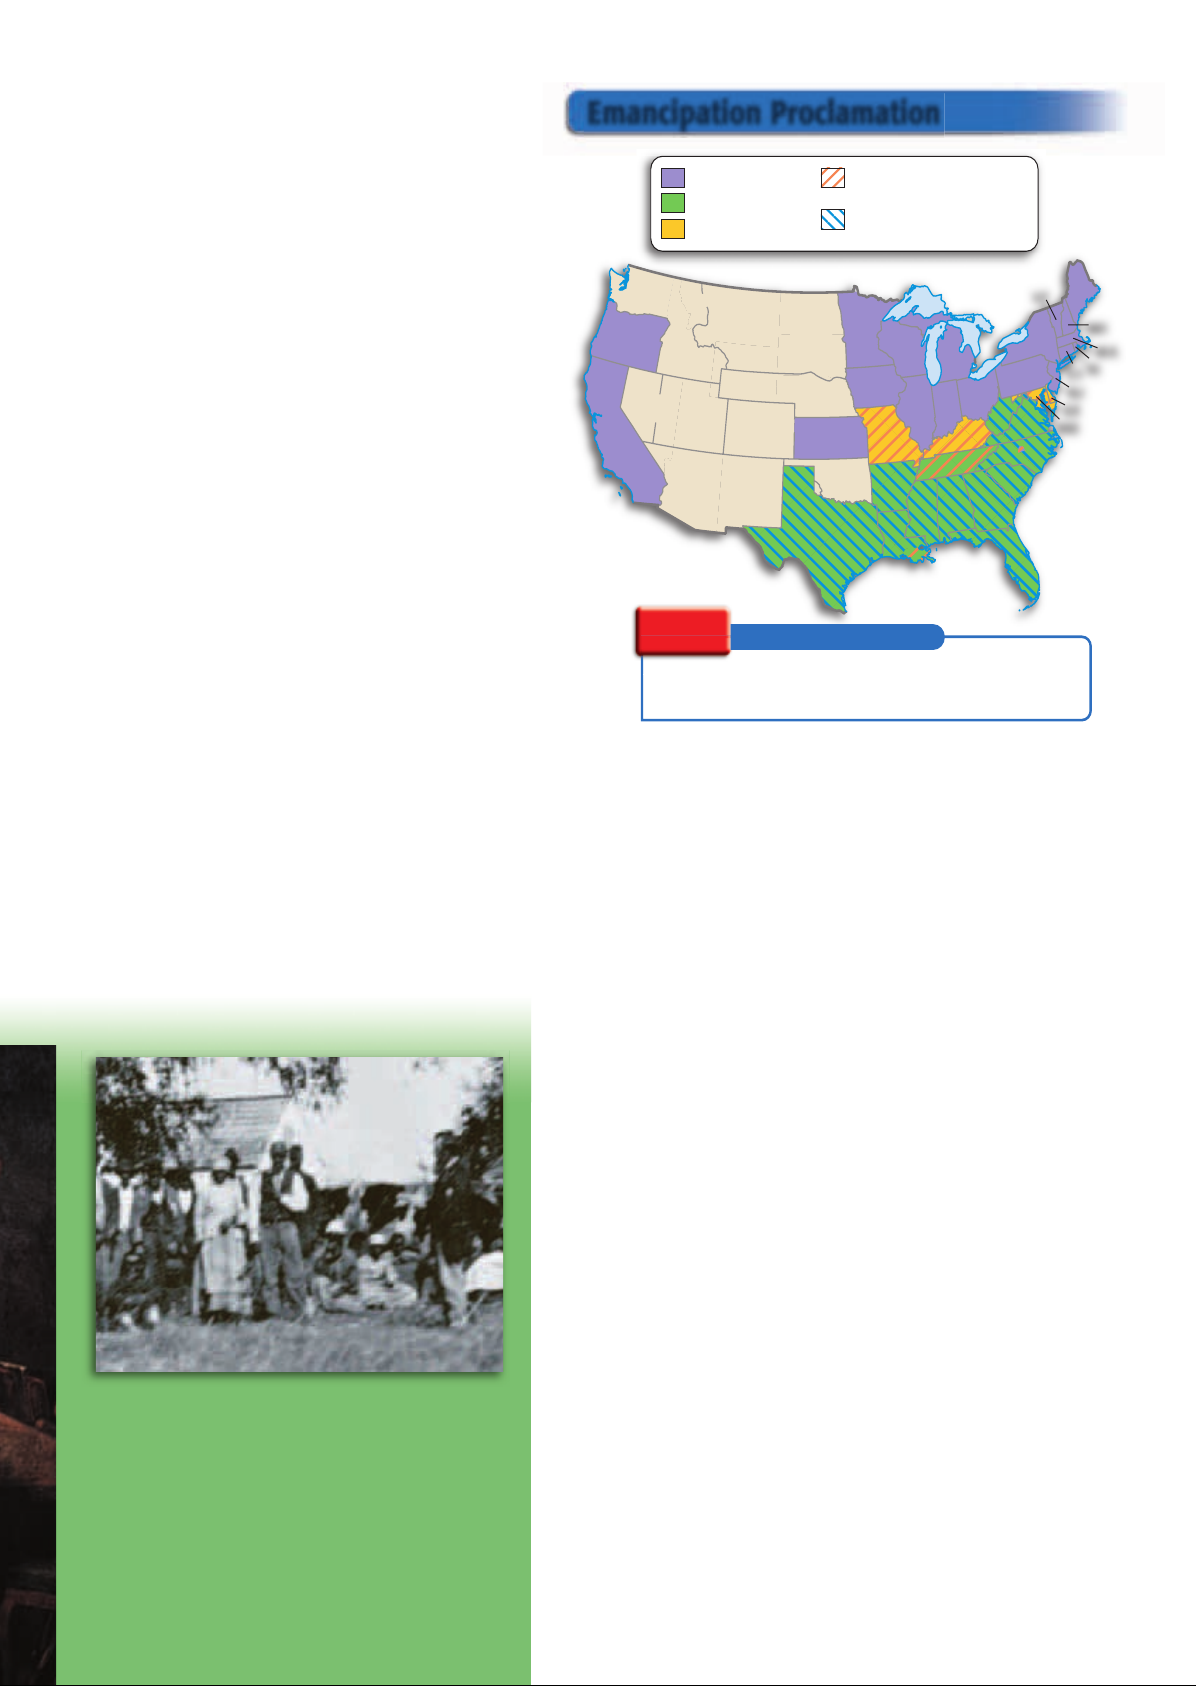 US_History_Textbook_8th_Grade_Chapter_15_The_Civil_War_h0BNFyV Image-21